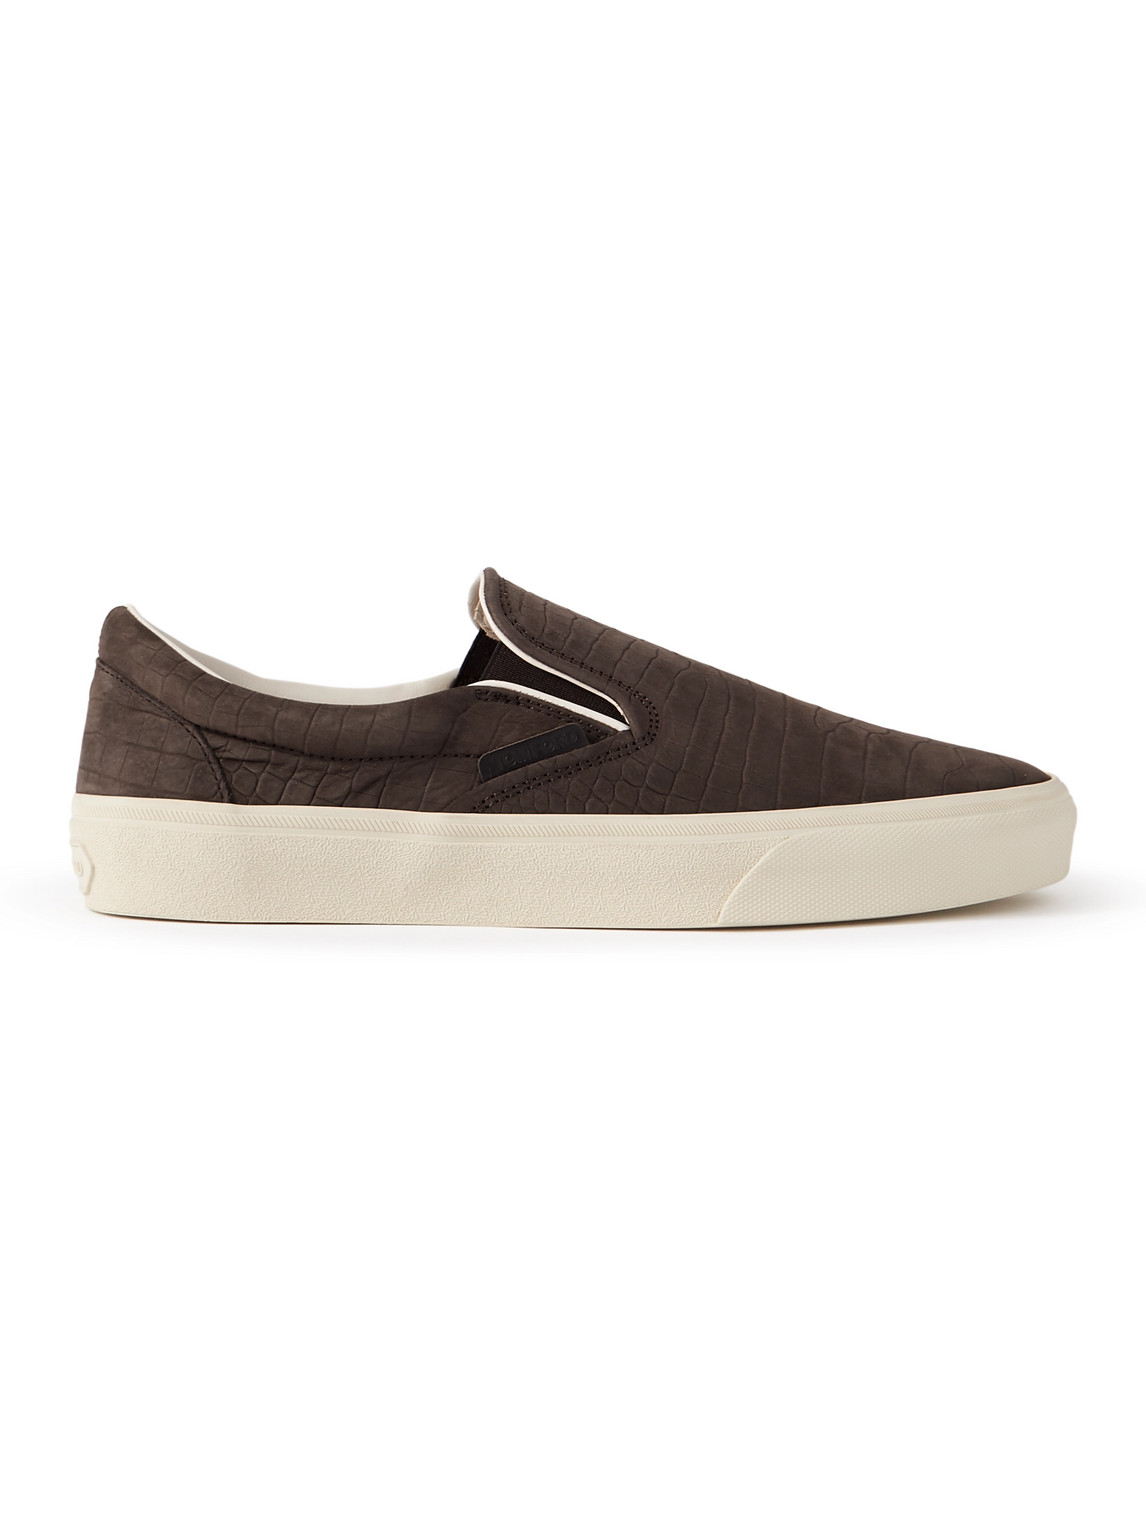 Tom Ford Brown Jude Slip-on Sneakers In Fango + Cream